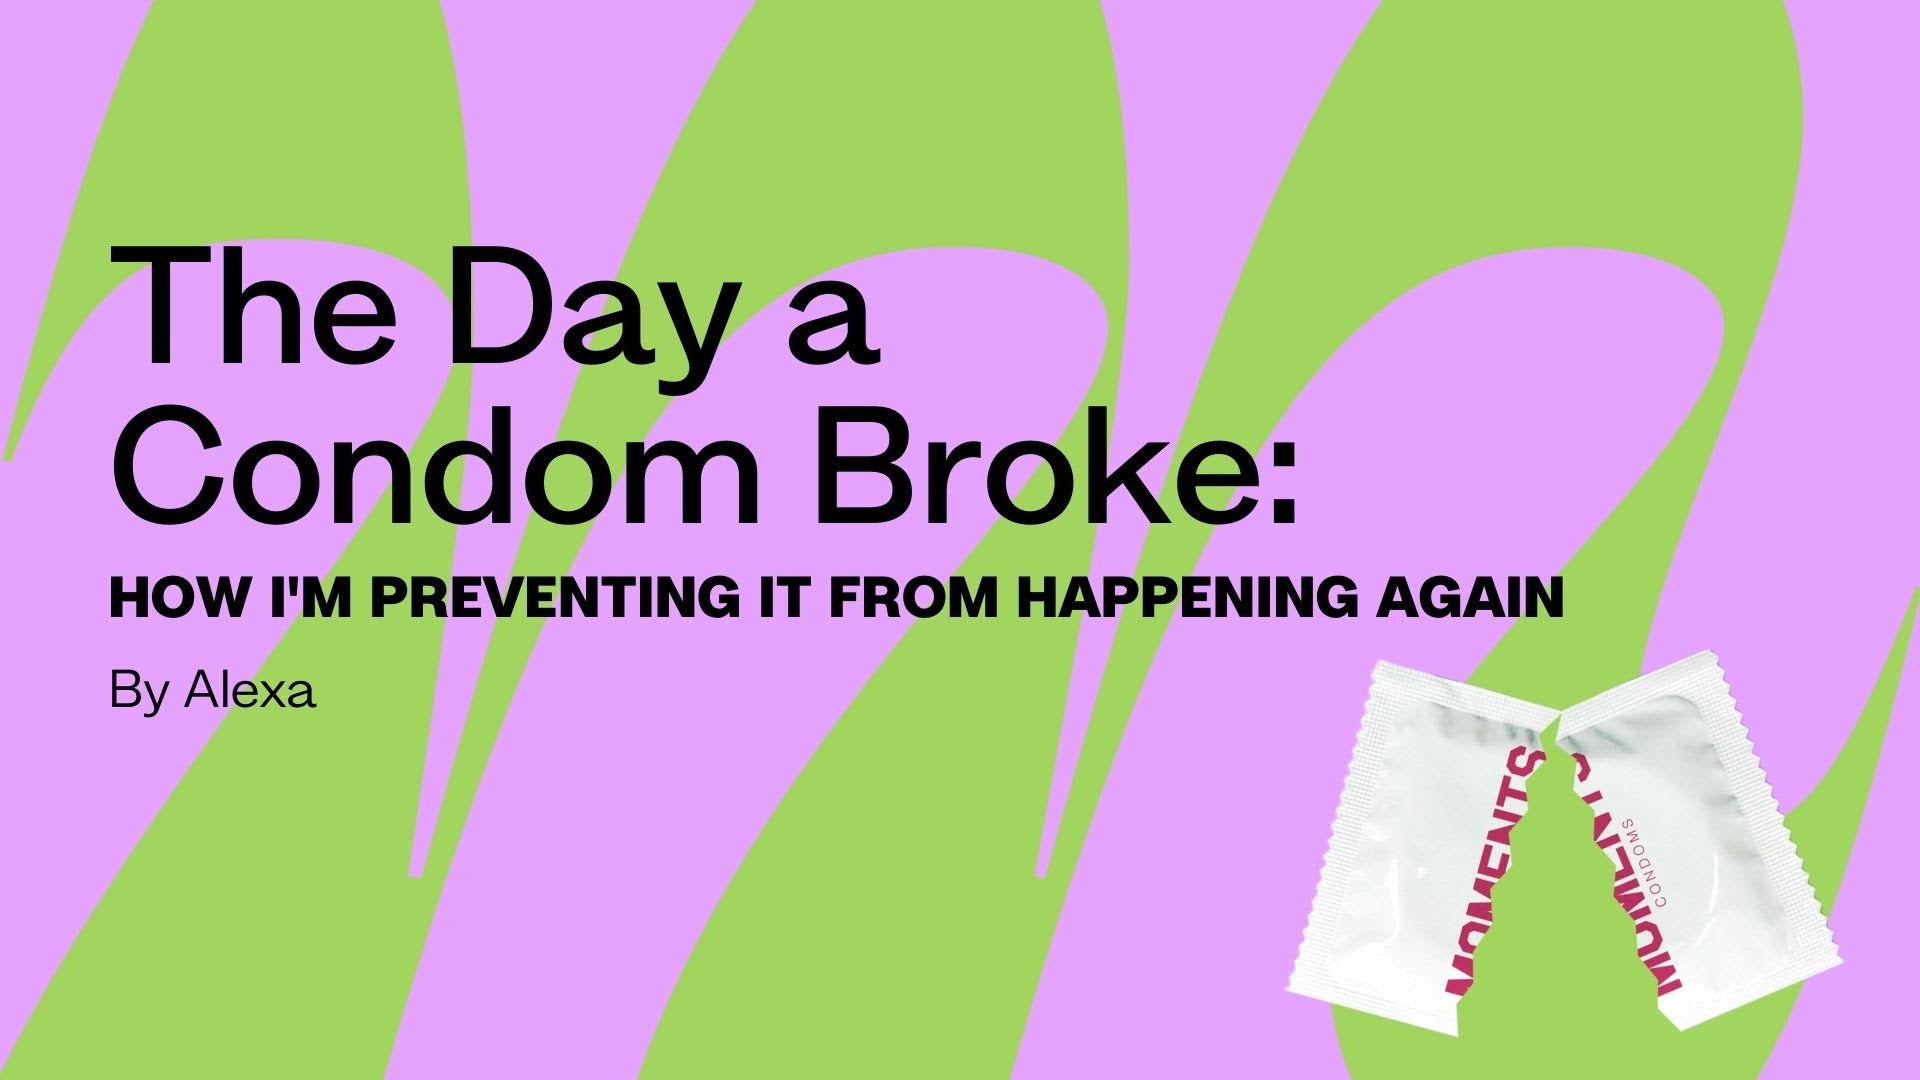 The Day a Condom Broke: How I'm Preventing It From Happening Again